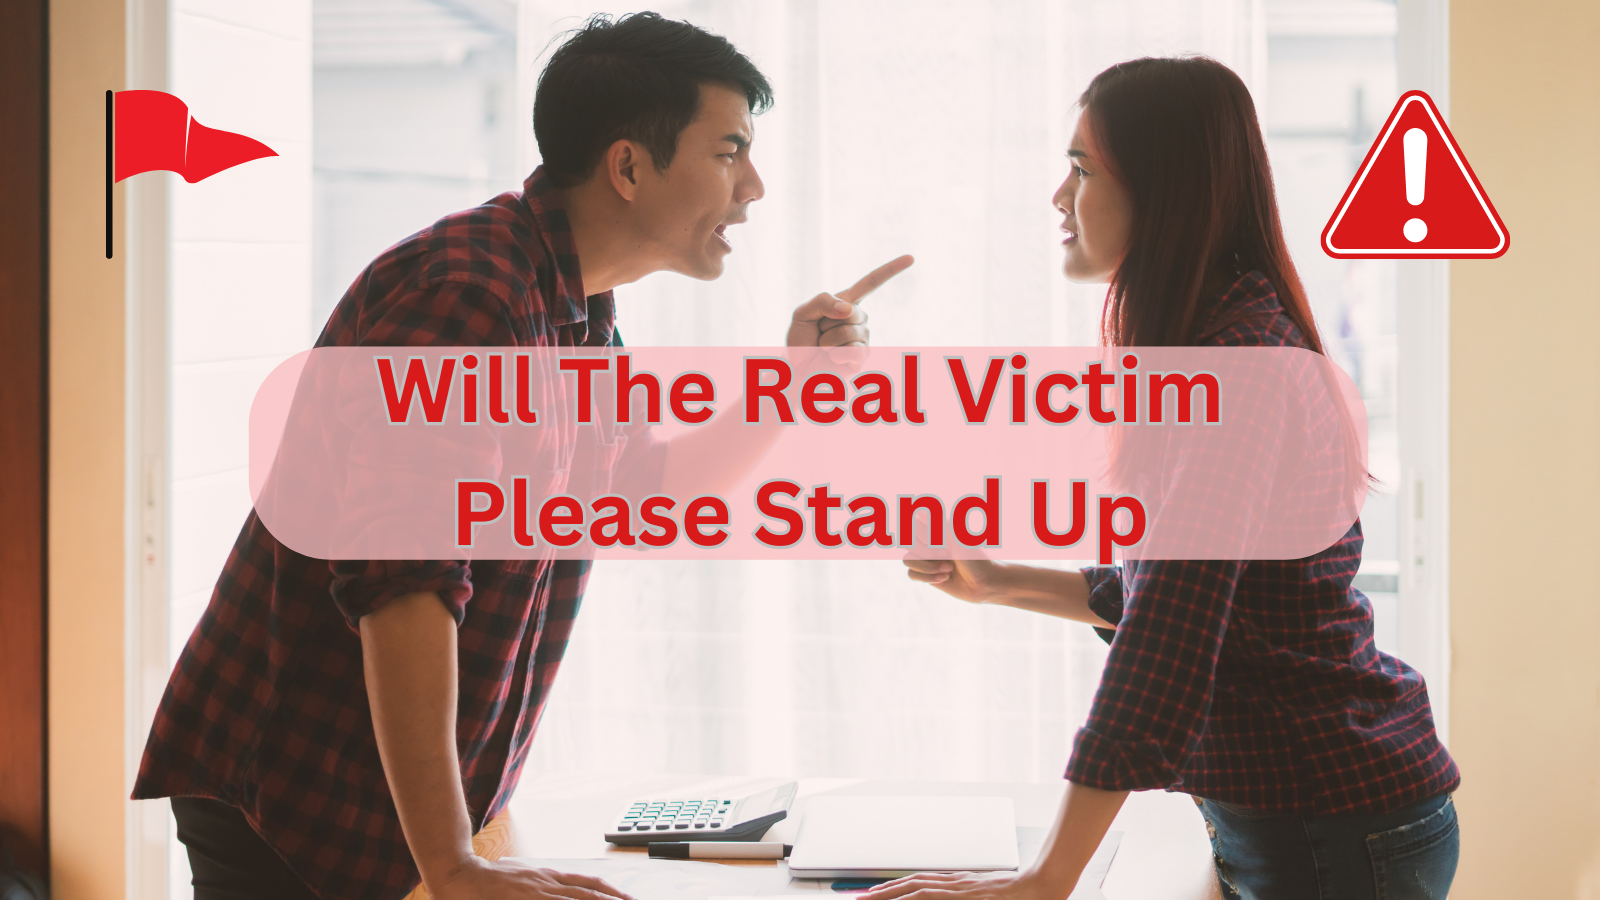 Will the real victim please stand up